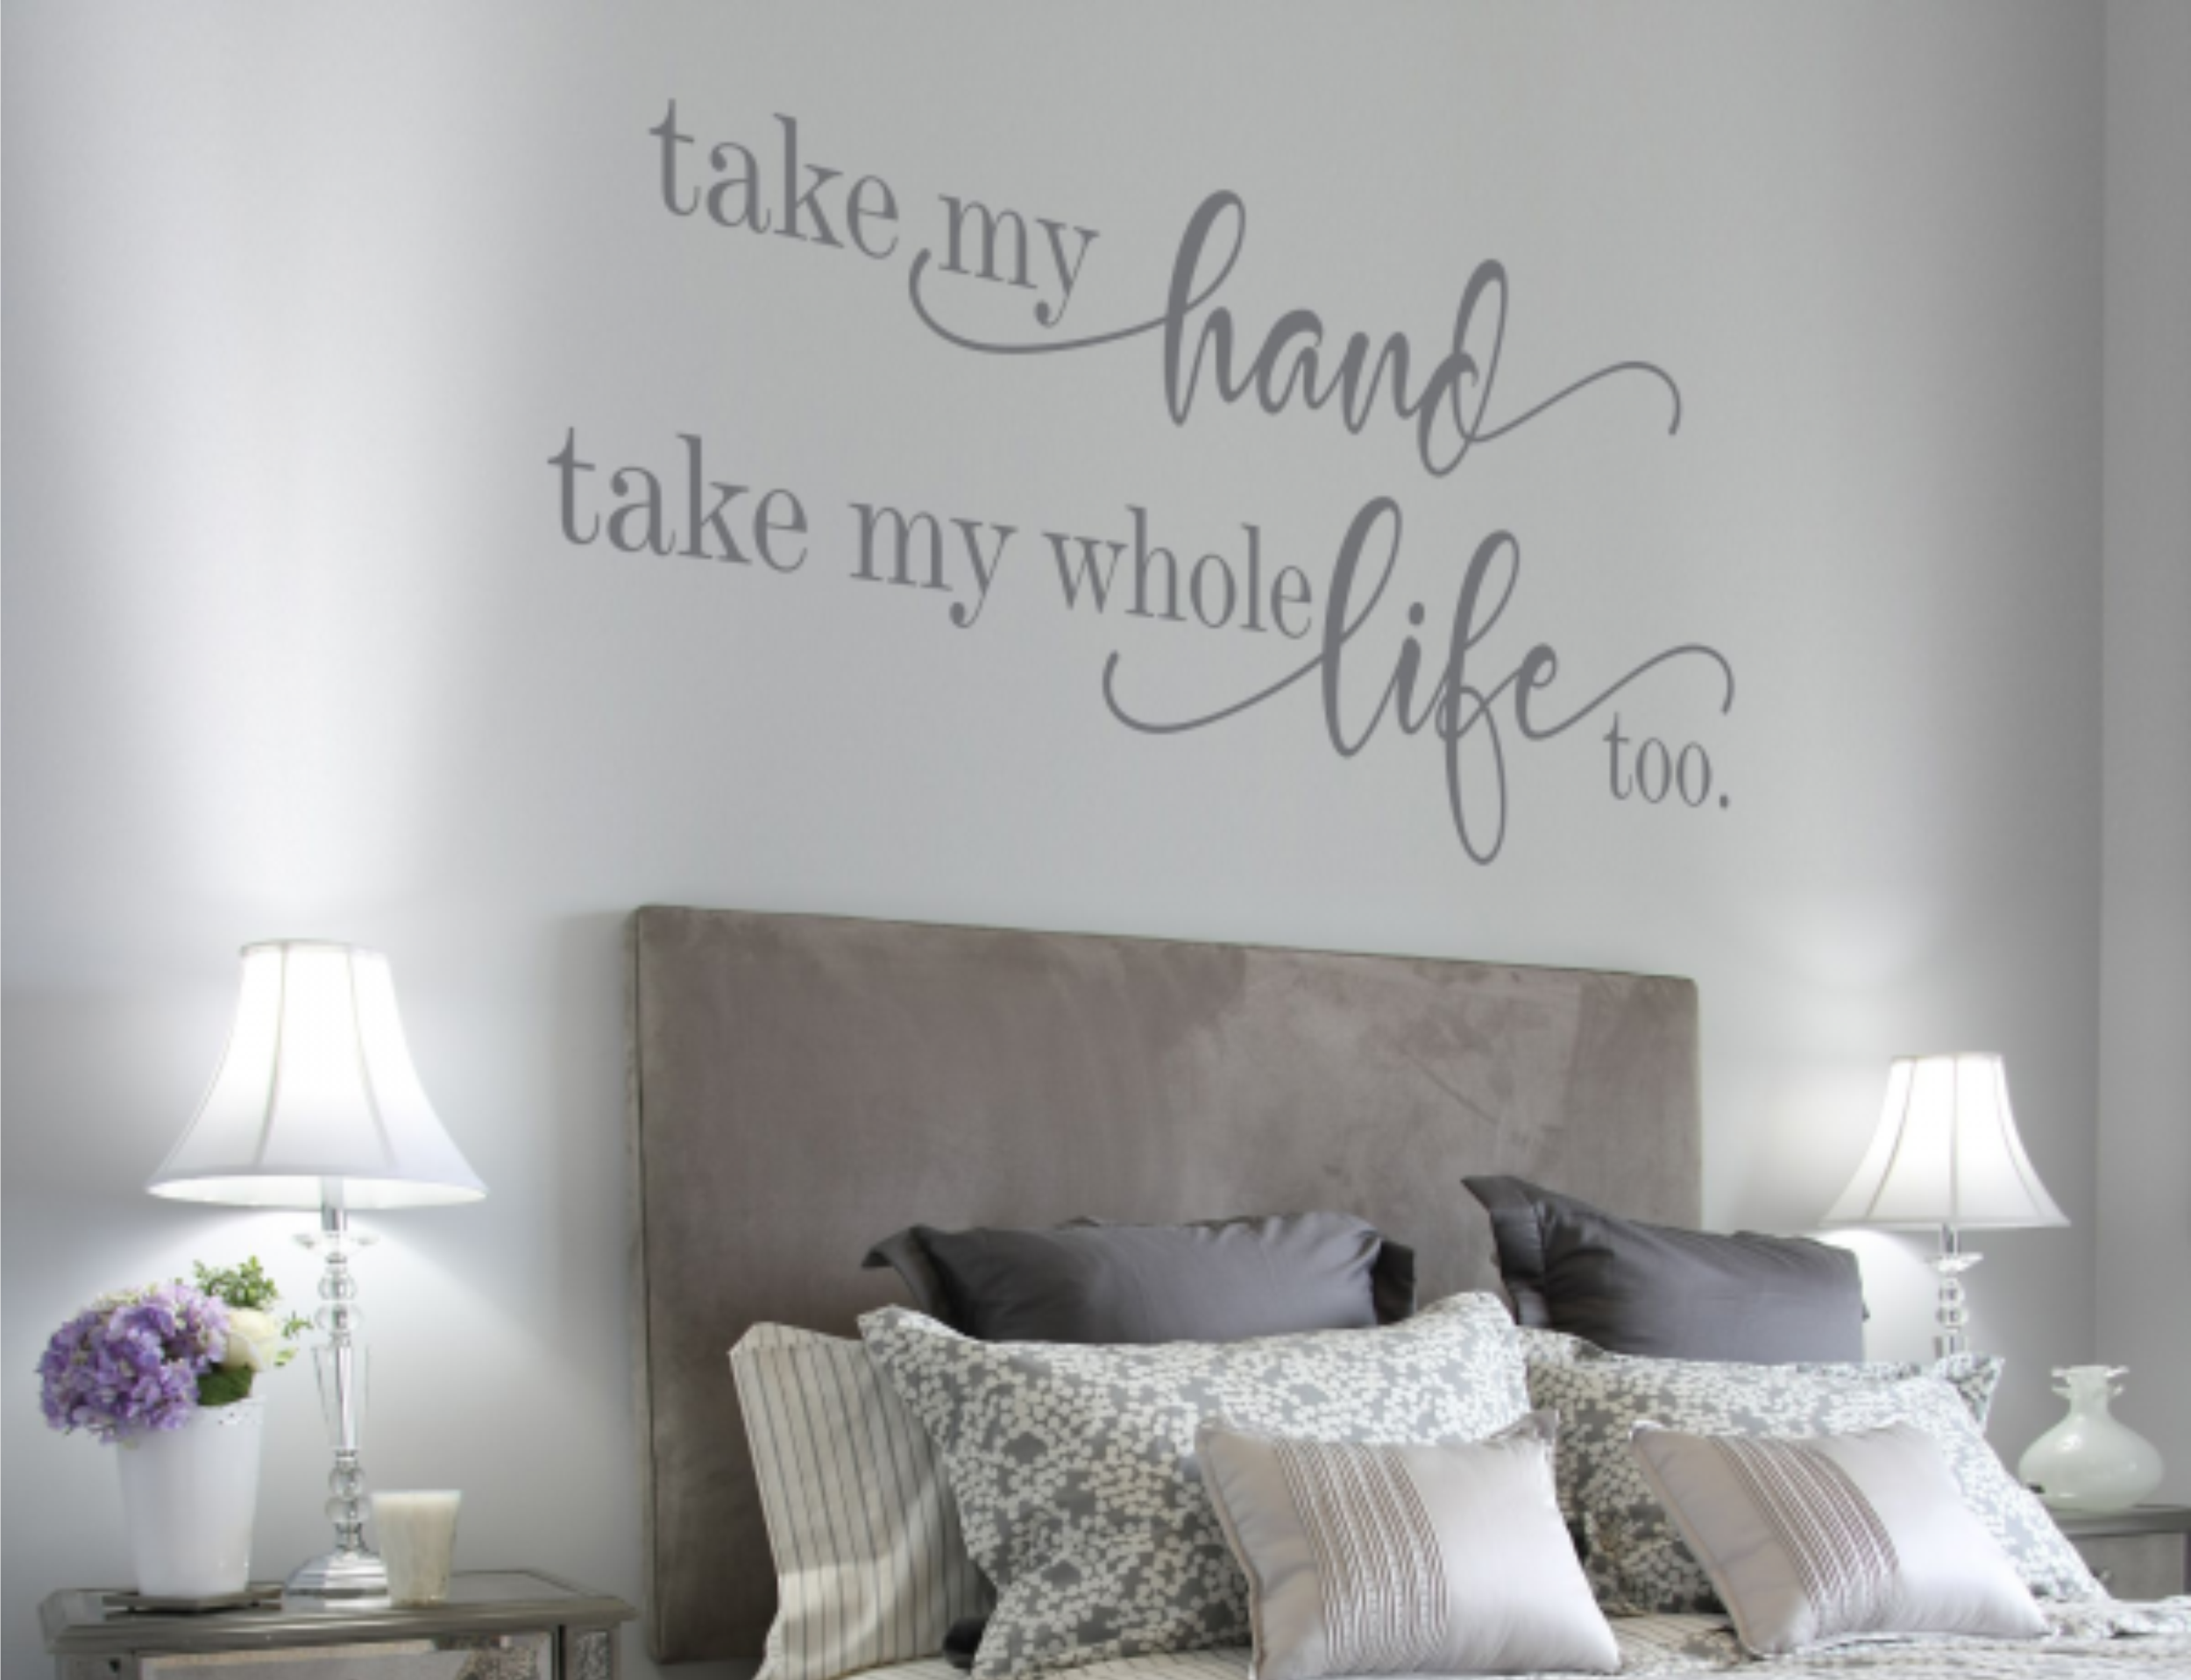 Beautifully designed romantic wall decals for Valentines Day decor or gifts that are unique and lovey-dovey!